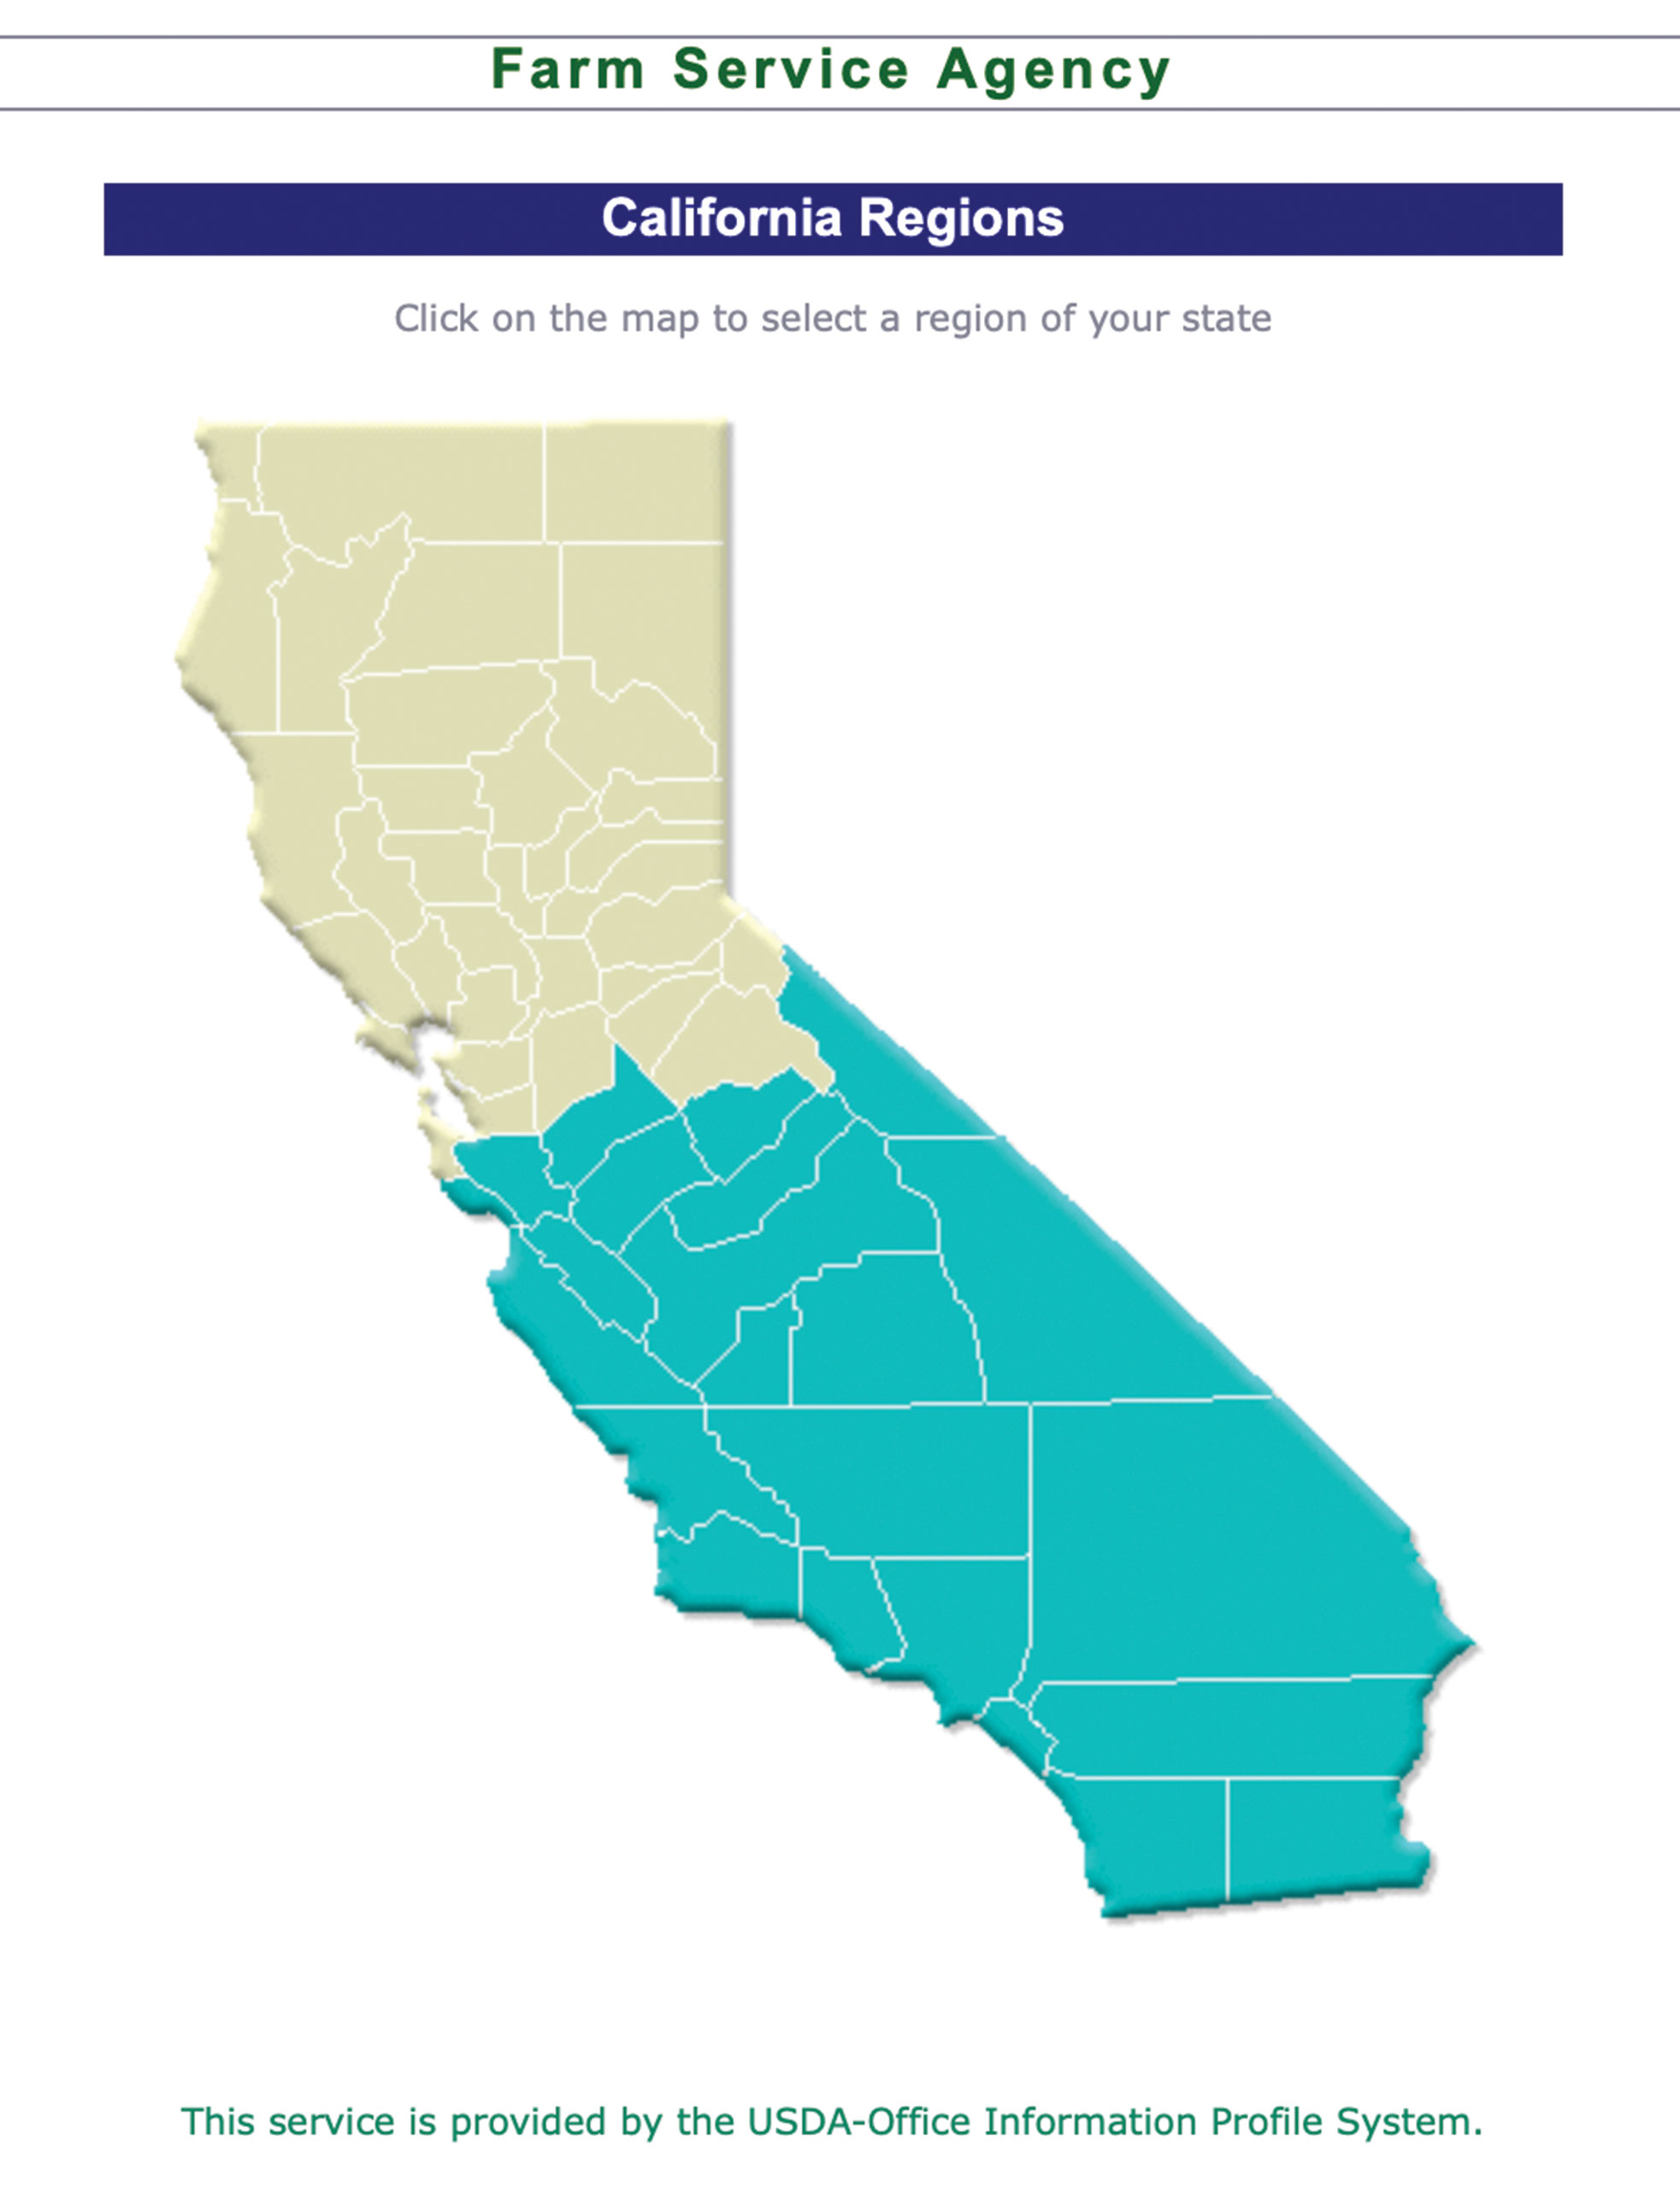 California FSA offices link to map